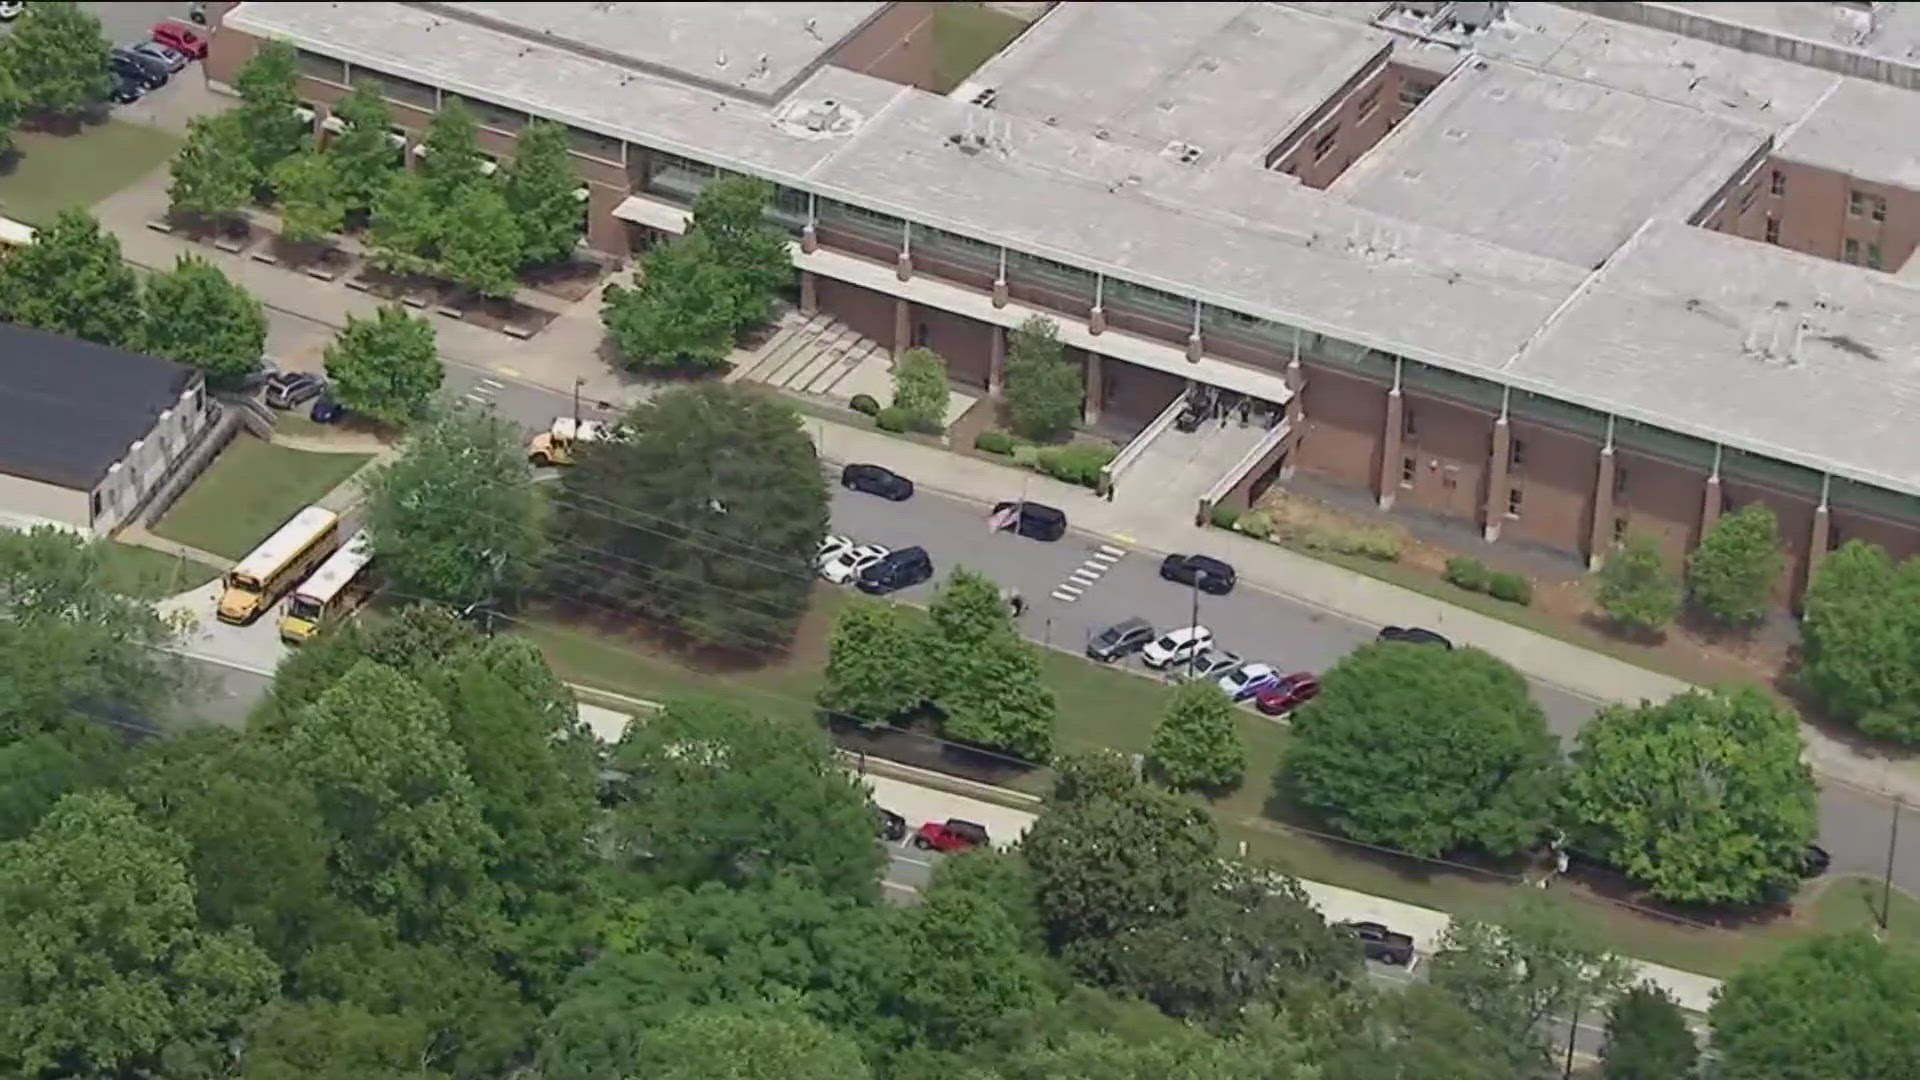 DeKalb County Fire said crews responded to the school, where they found a 15-year-old student in cardiac arrest.